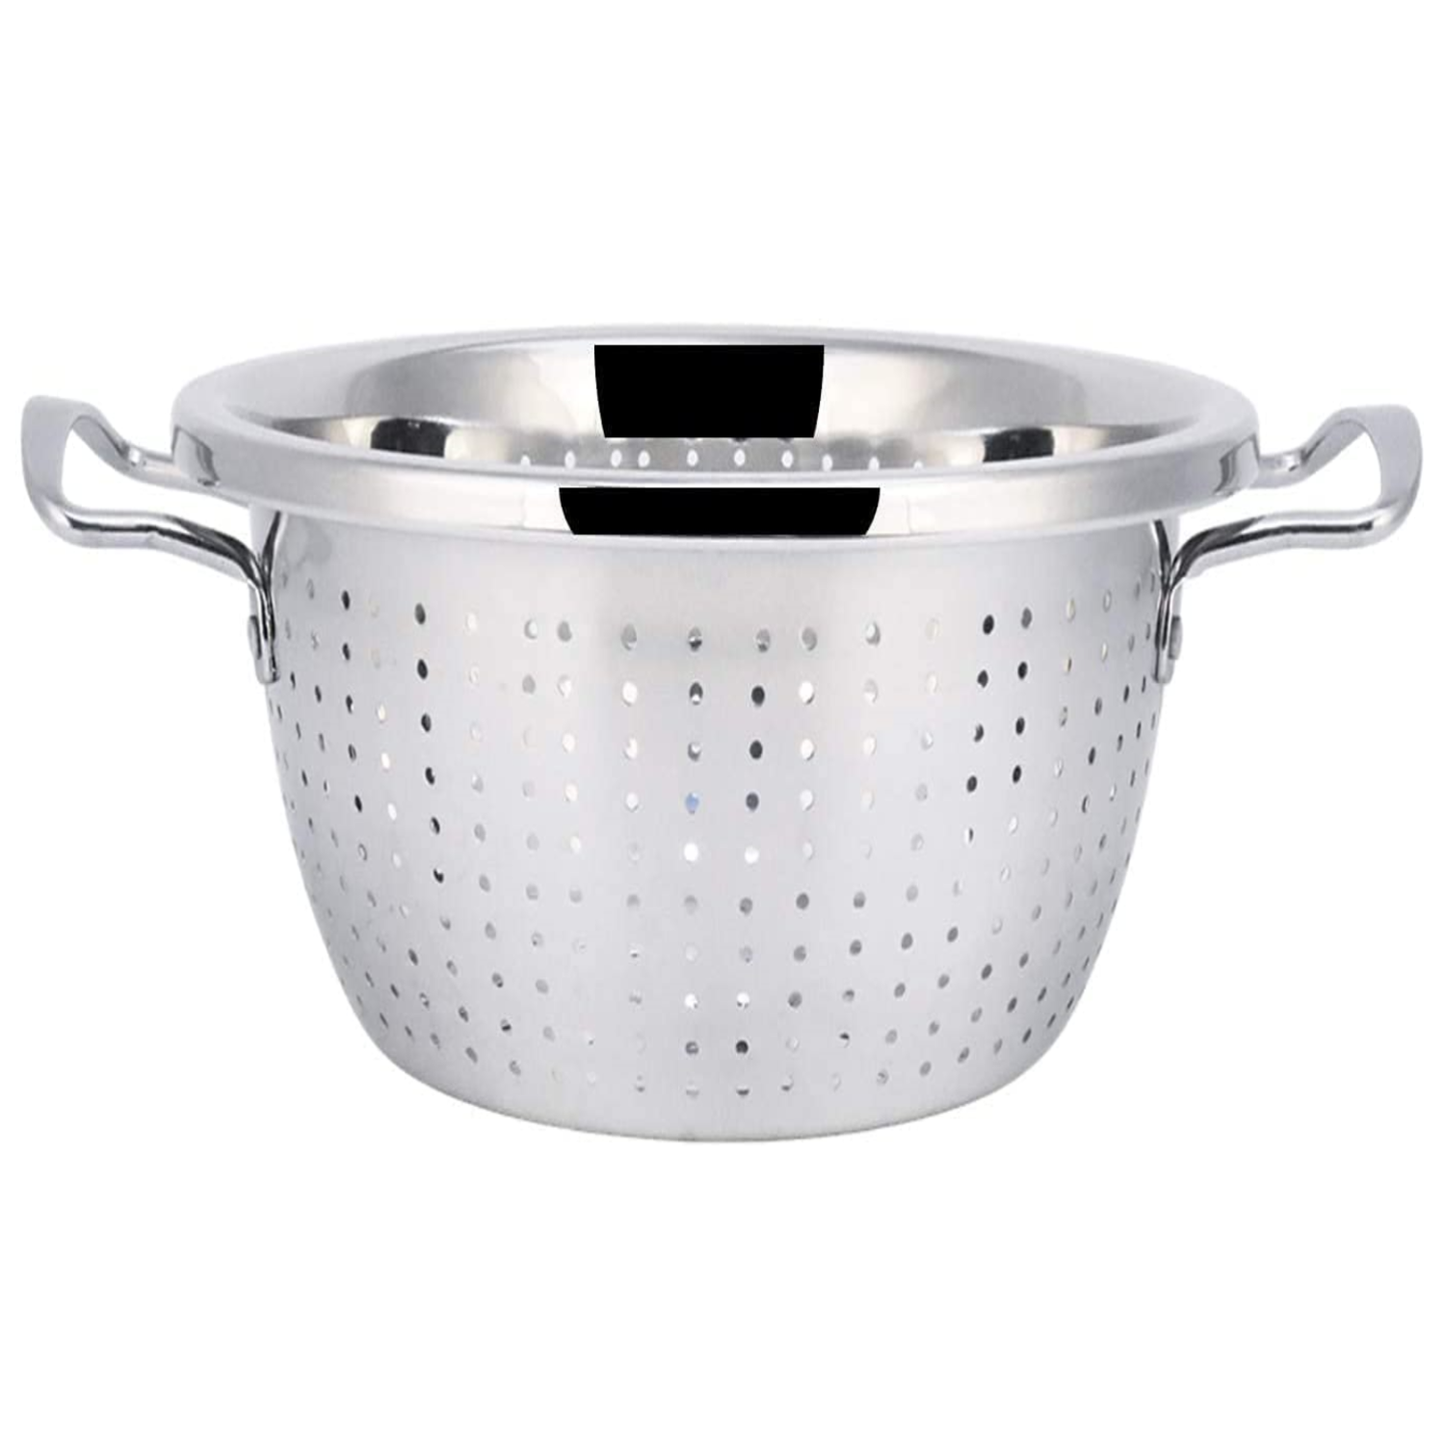 36cm Stainless Steel Tall Colander